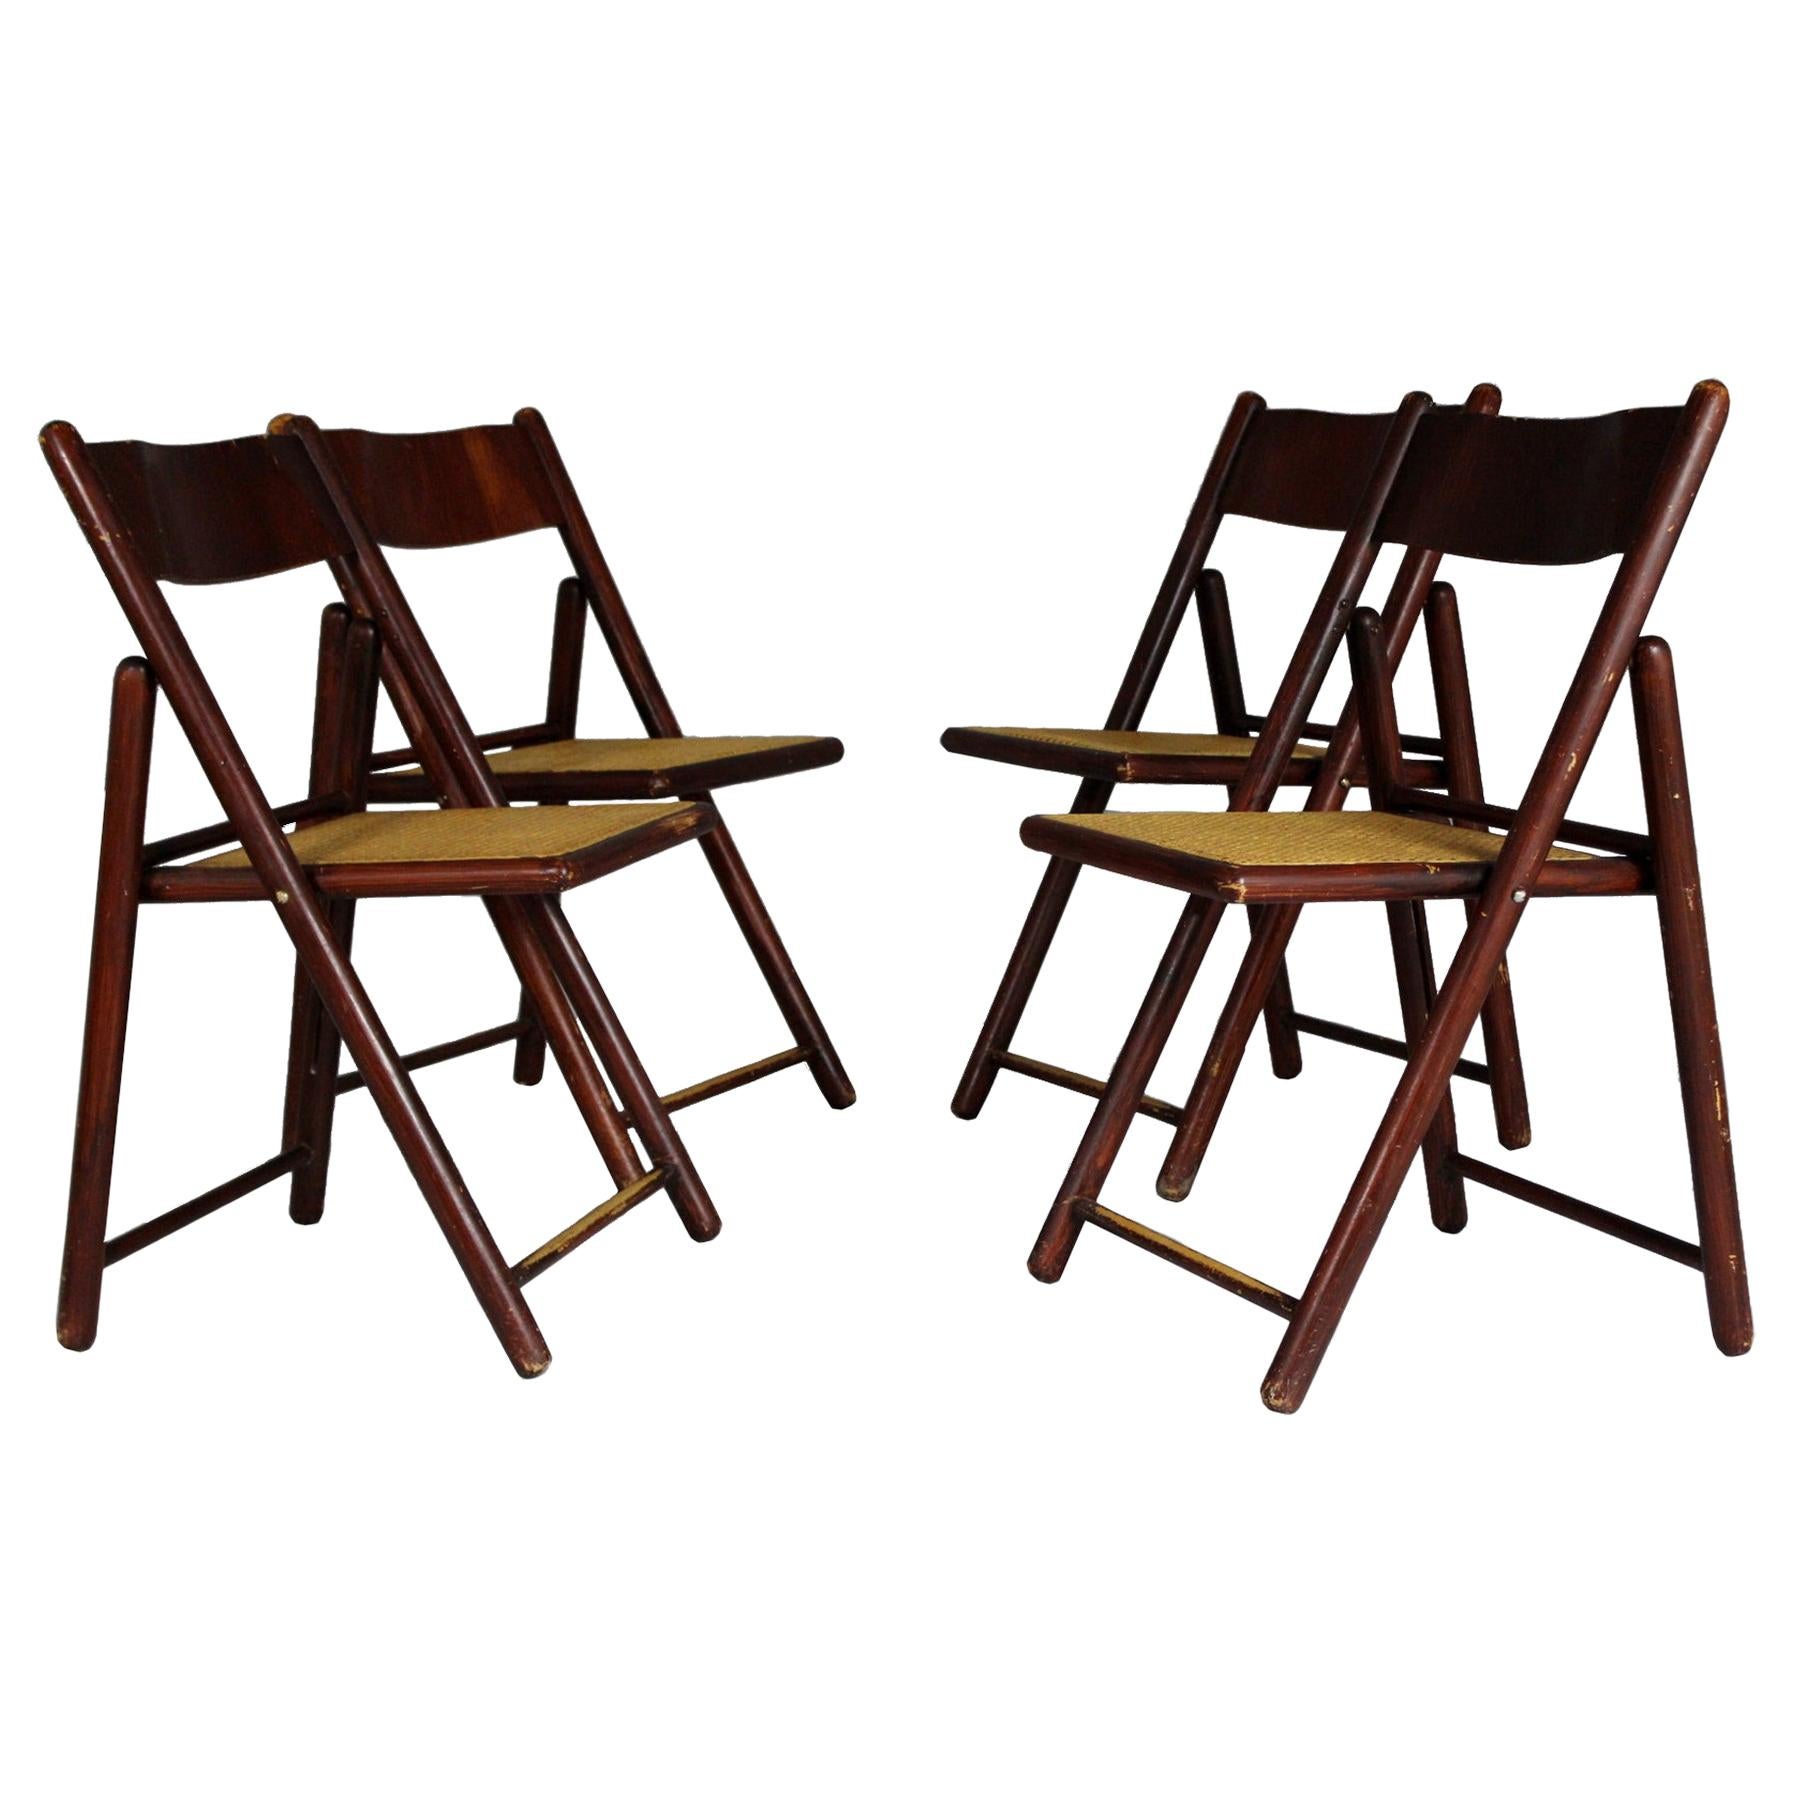 Set of Four Folding Chairs, 1970s